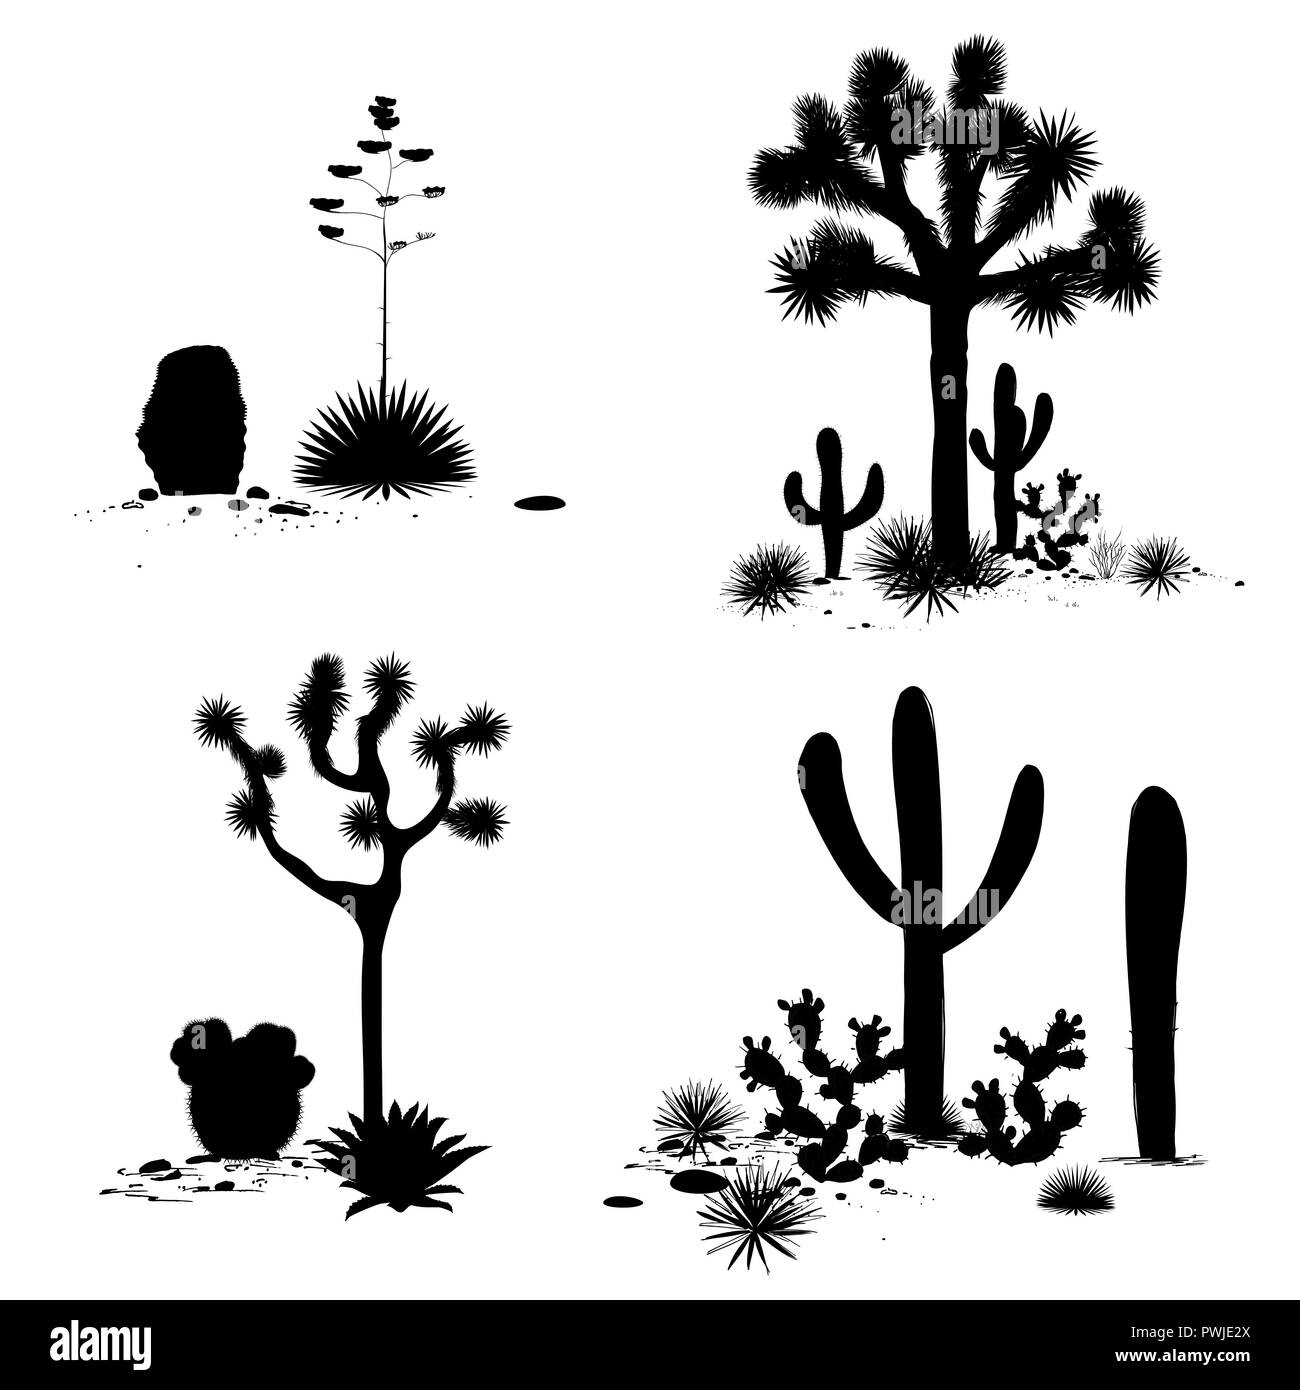 Cacti landscape groups. Vector set with silhouettes of saguaro, prickly pear, and agave. Black and white banner, place for text Stock Vector